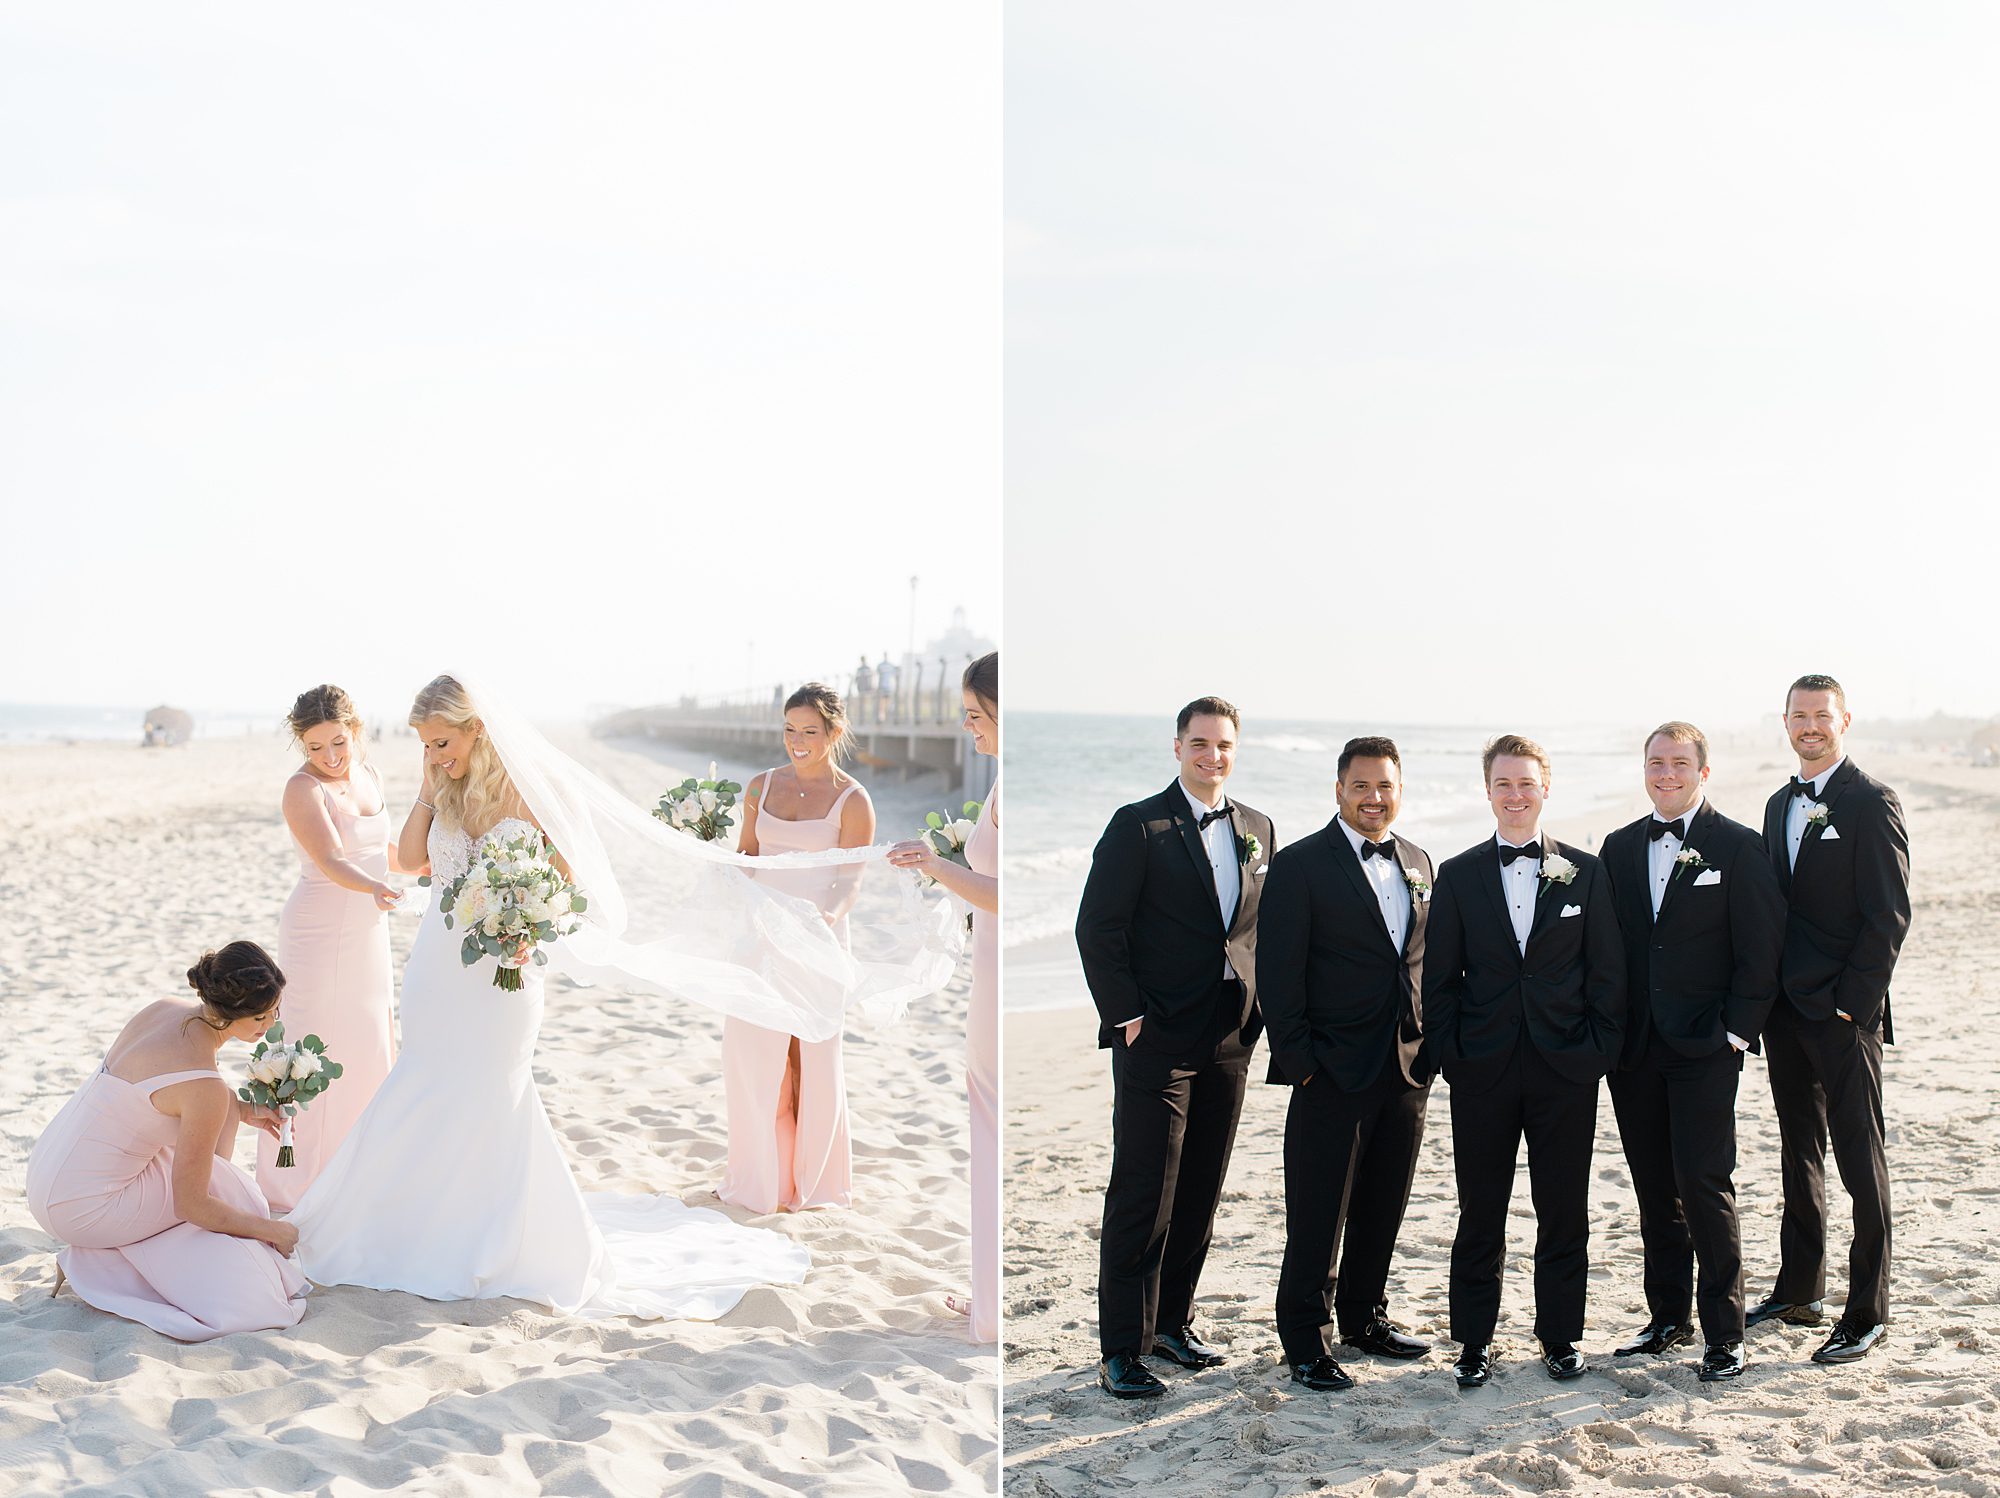 Bridesmaids and groomsmen portraits on the beach